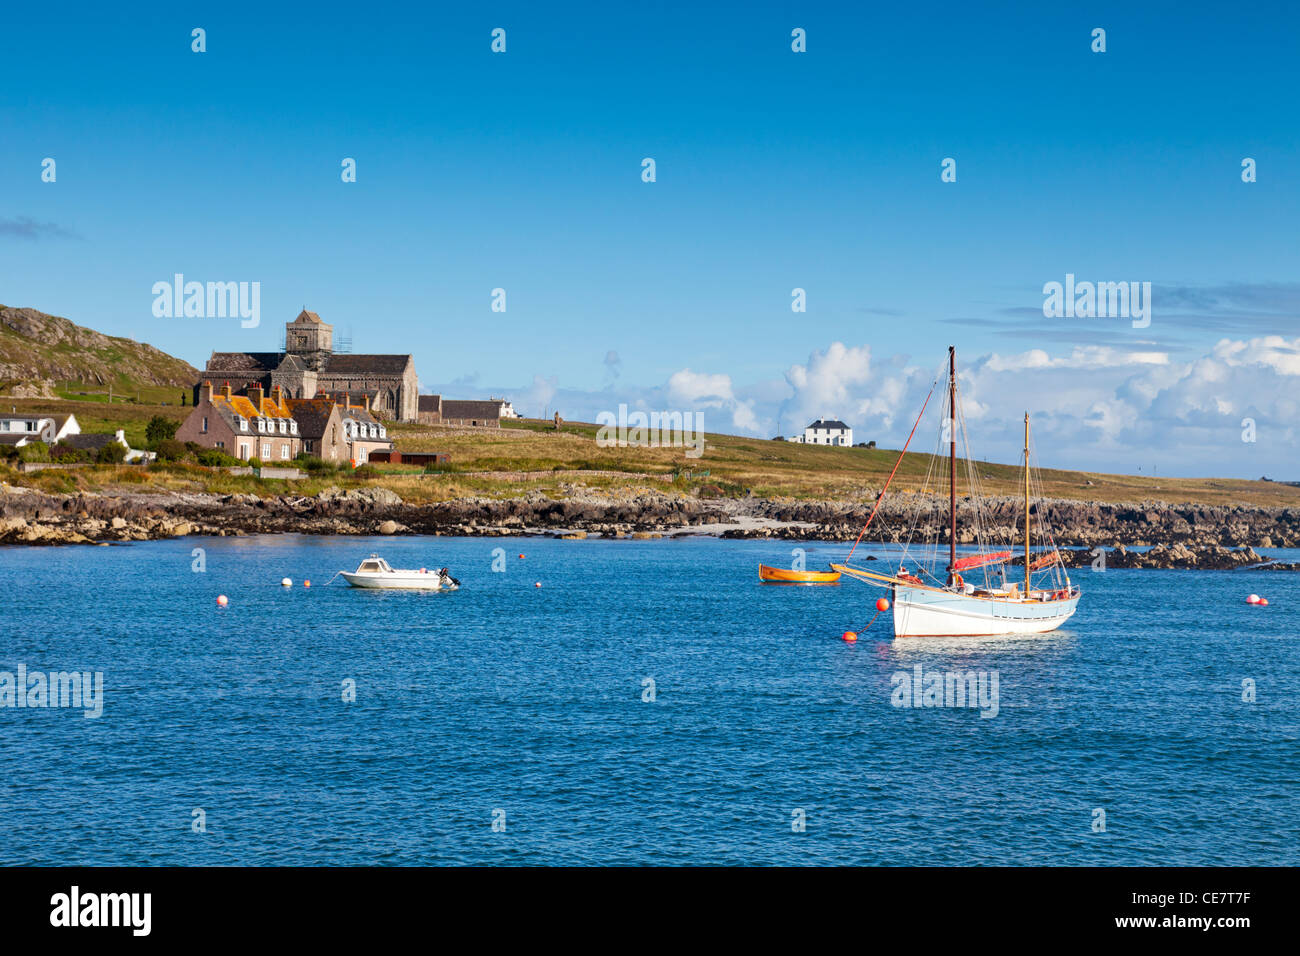 The island of Iona, Argyll, Scotland, with its Abbey, taken from the sea, Stock Photo